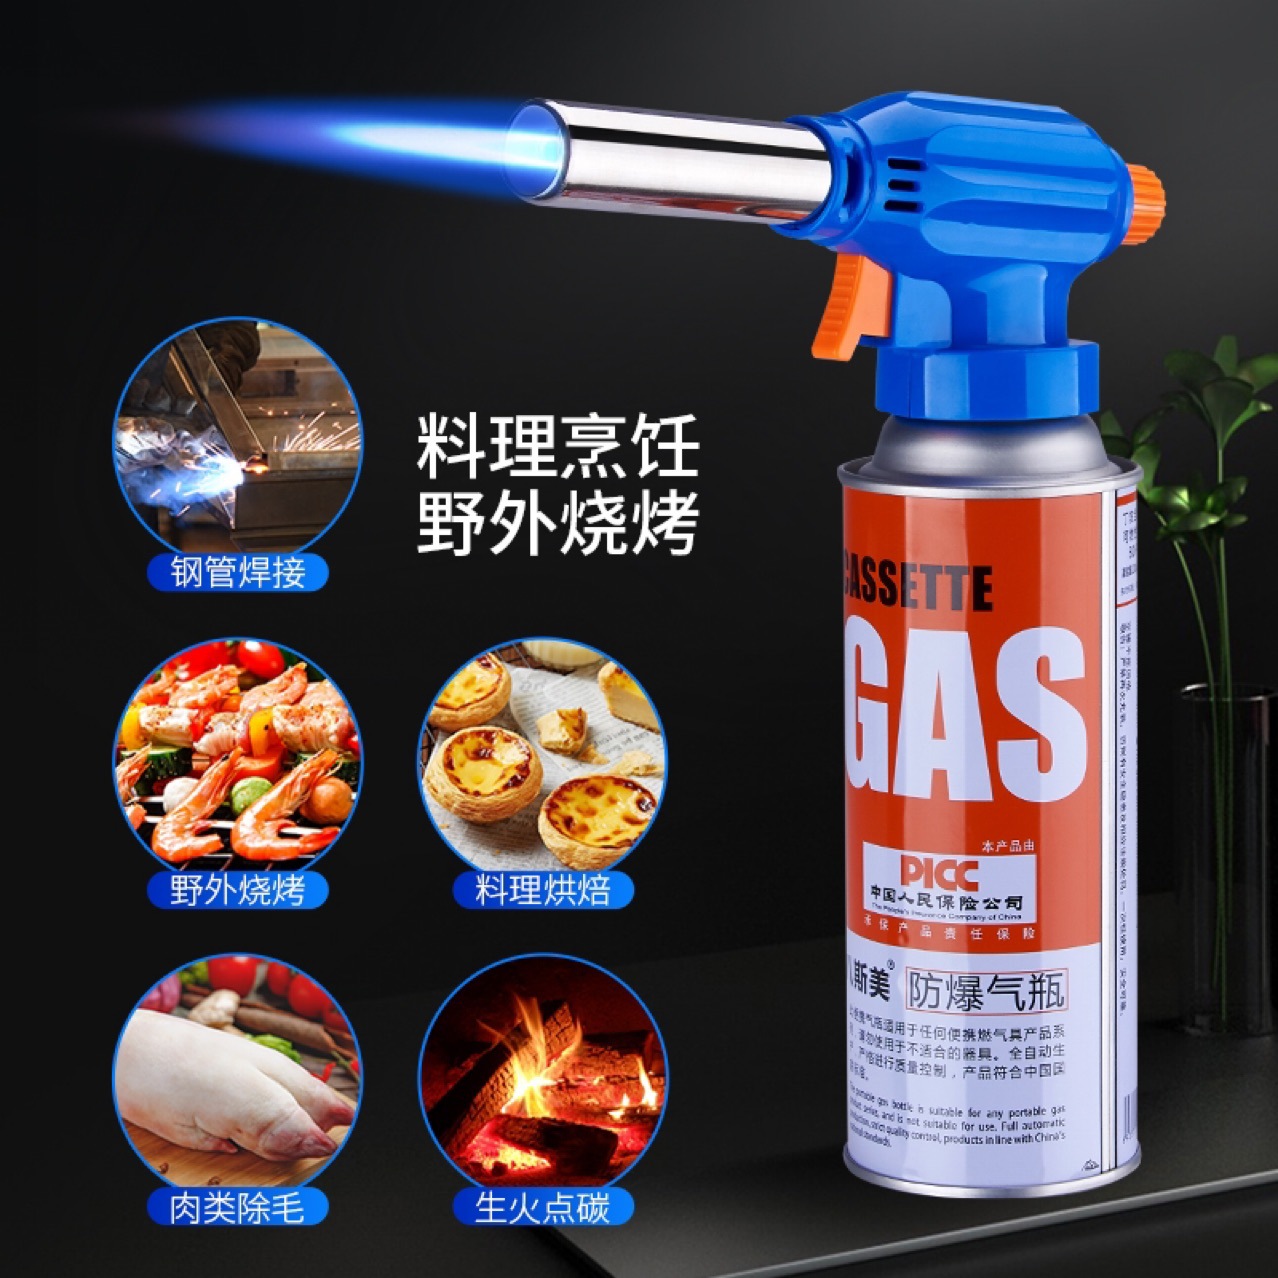 New Flame Gun Household Kitchen Baking Direct Punching Igniter Outdoor Portable Barbecue Card Type Burning Torch Wholesale